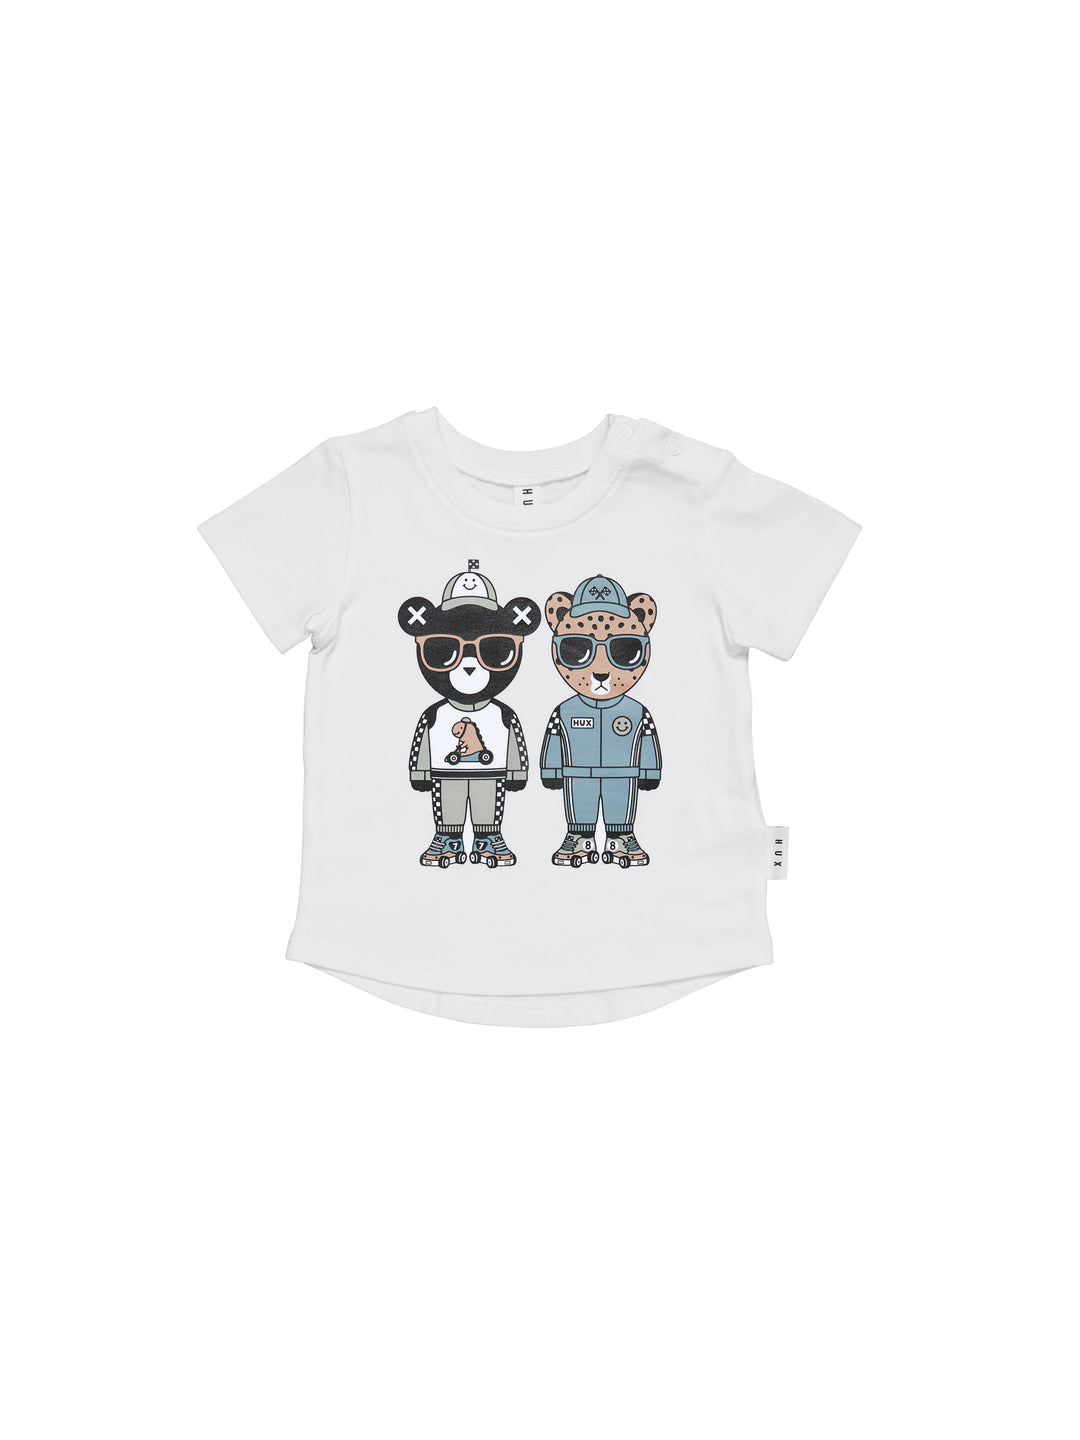 Racer Pals T-shirt by Huxbaby